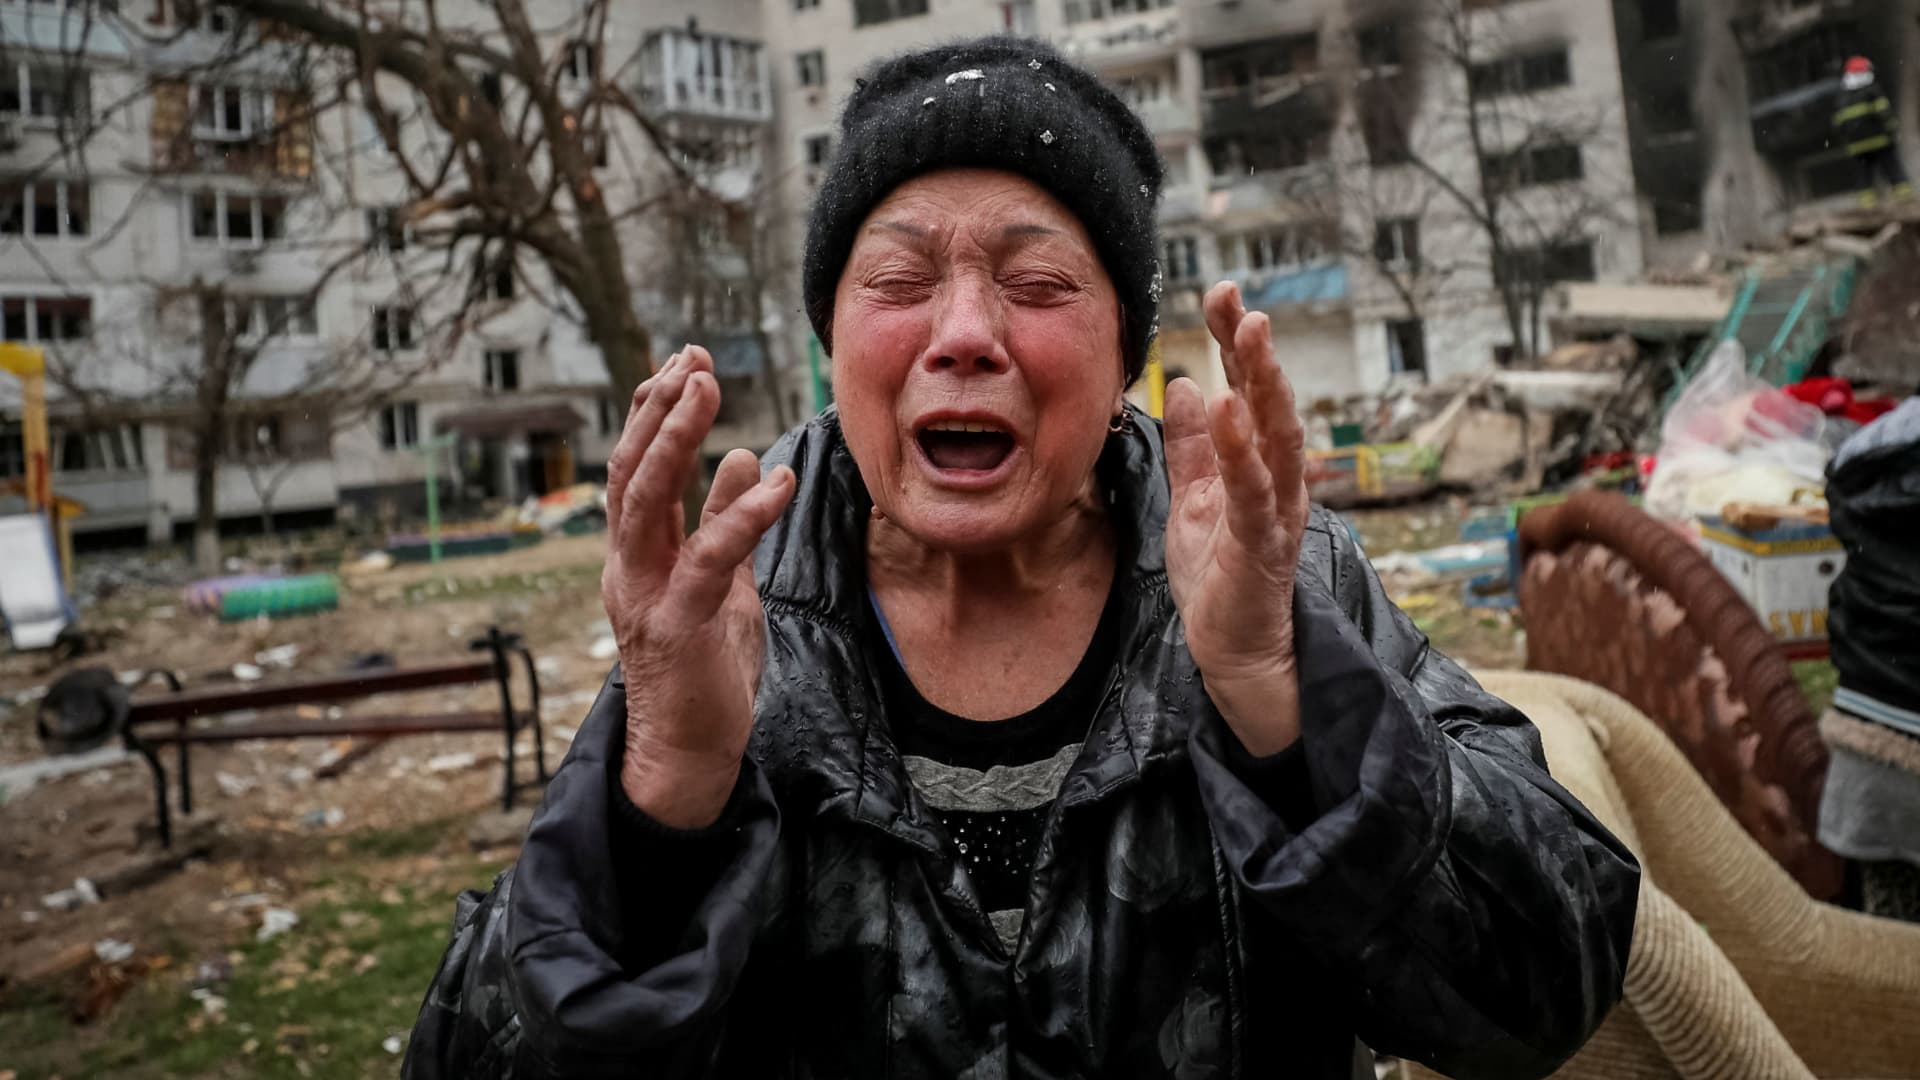 Mariya, 77, whose daughter and son-in-law died under the rubble of a building destroyed by Russian shelling, cries, amid Russia's invasion on Ukraine in Borodyanka, in Kyiv region, Ukraine April 8, 2022.